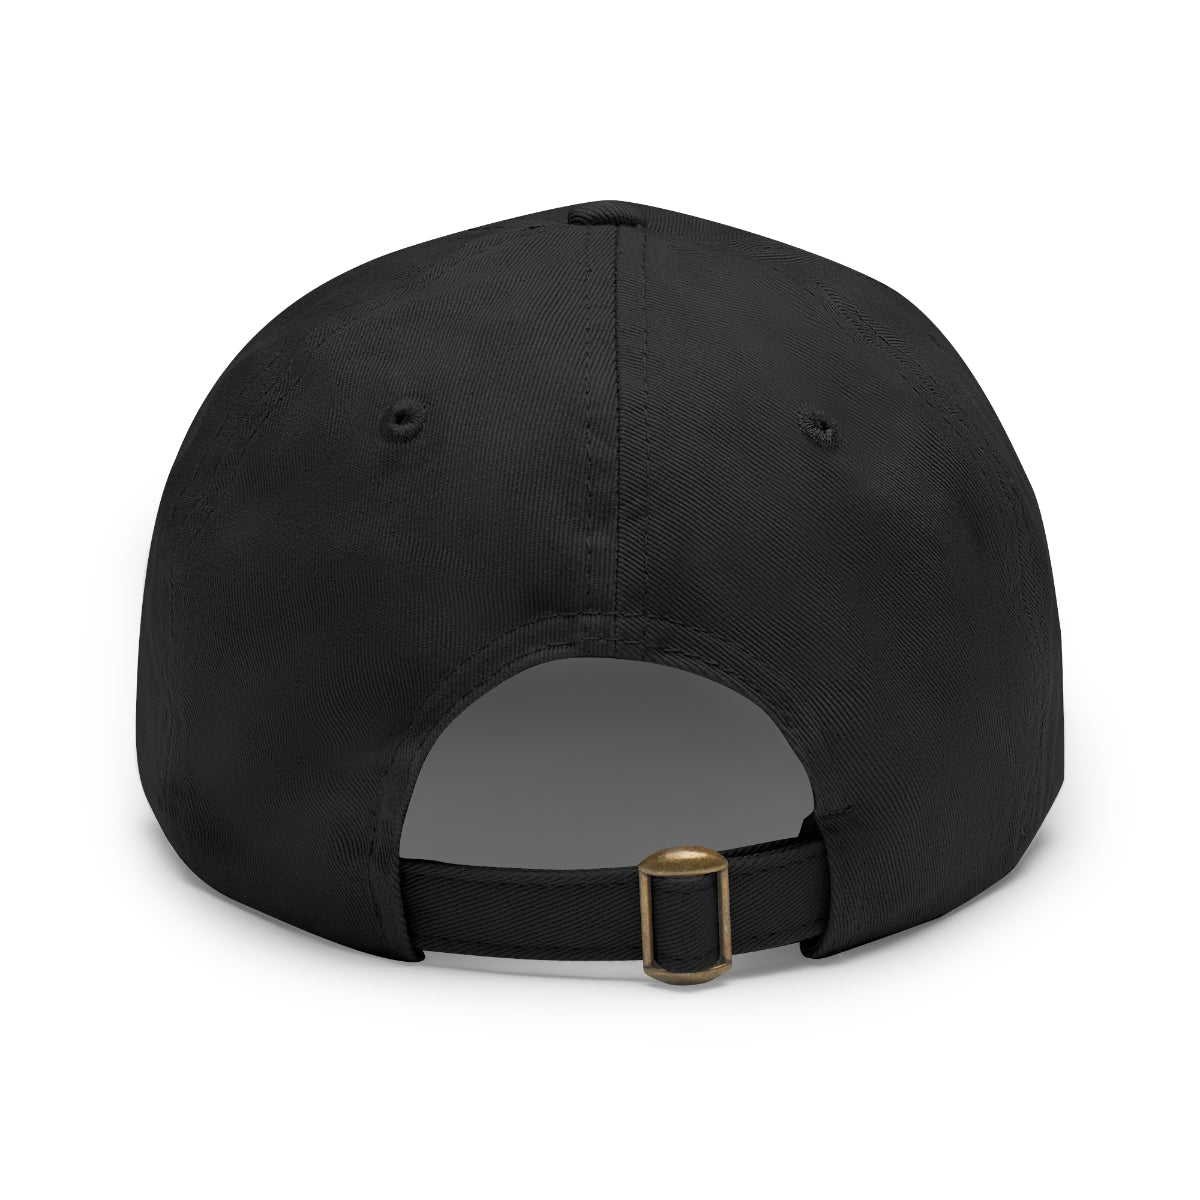 SWCC 5352 Hat with Leather Patch